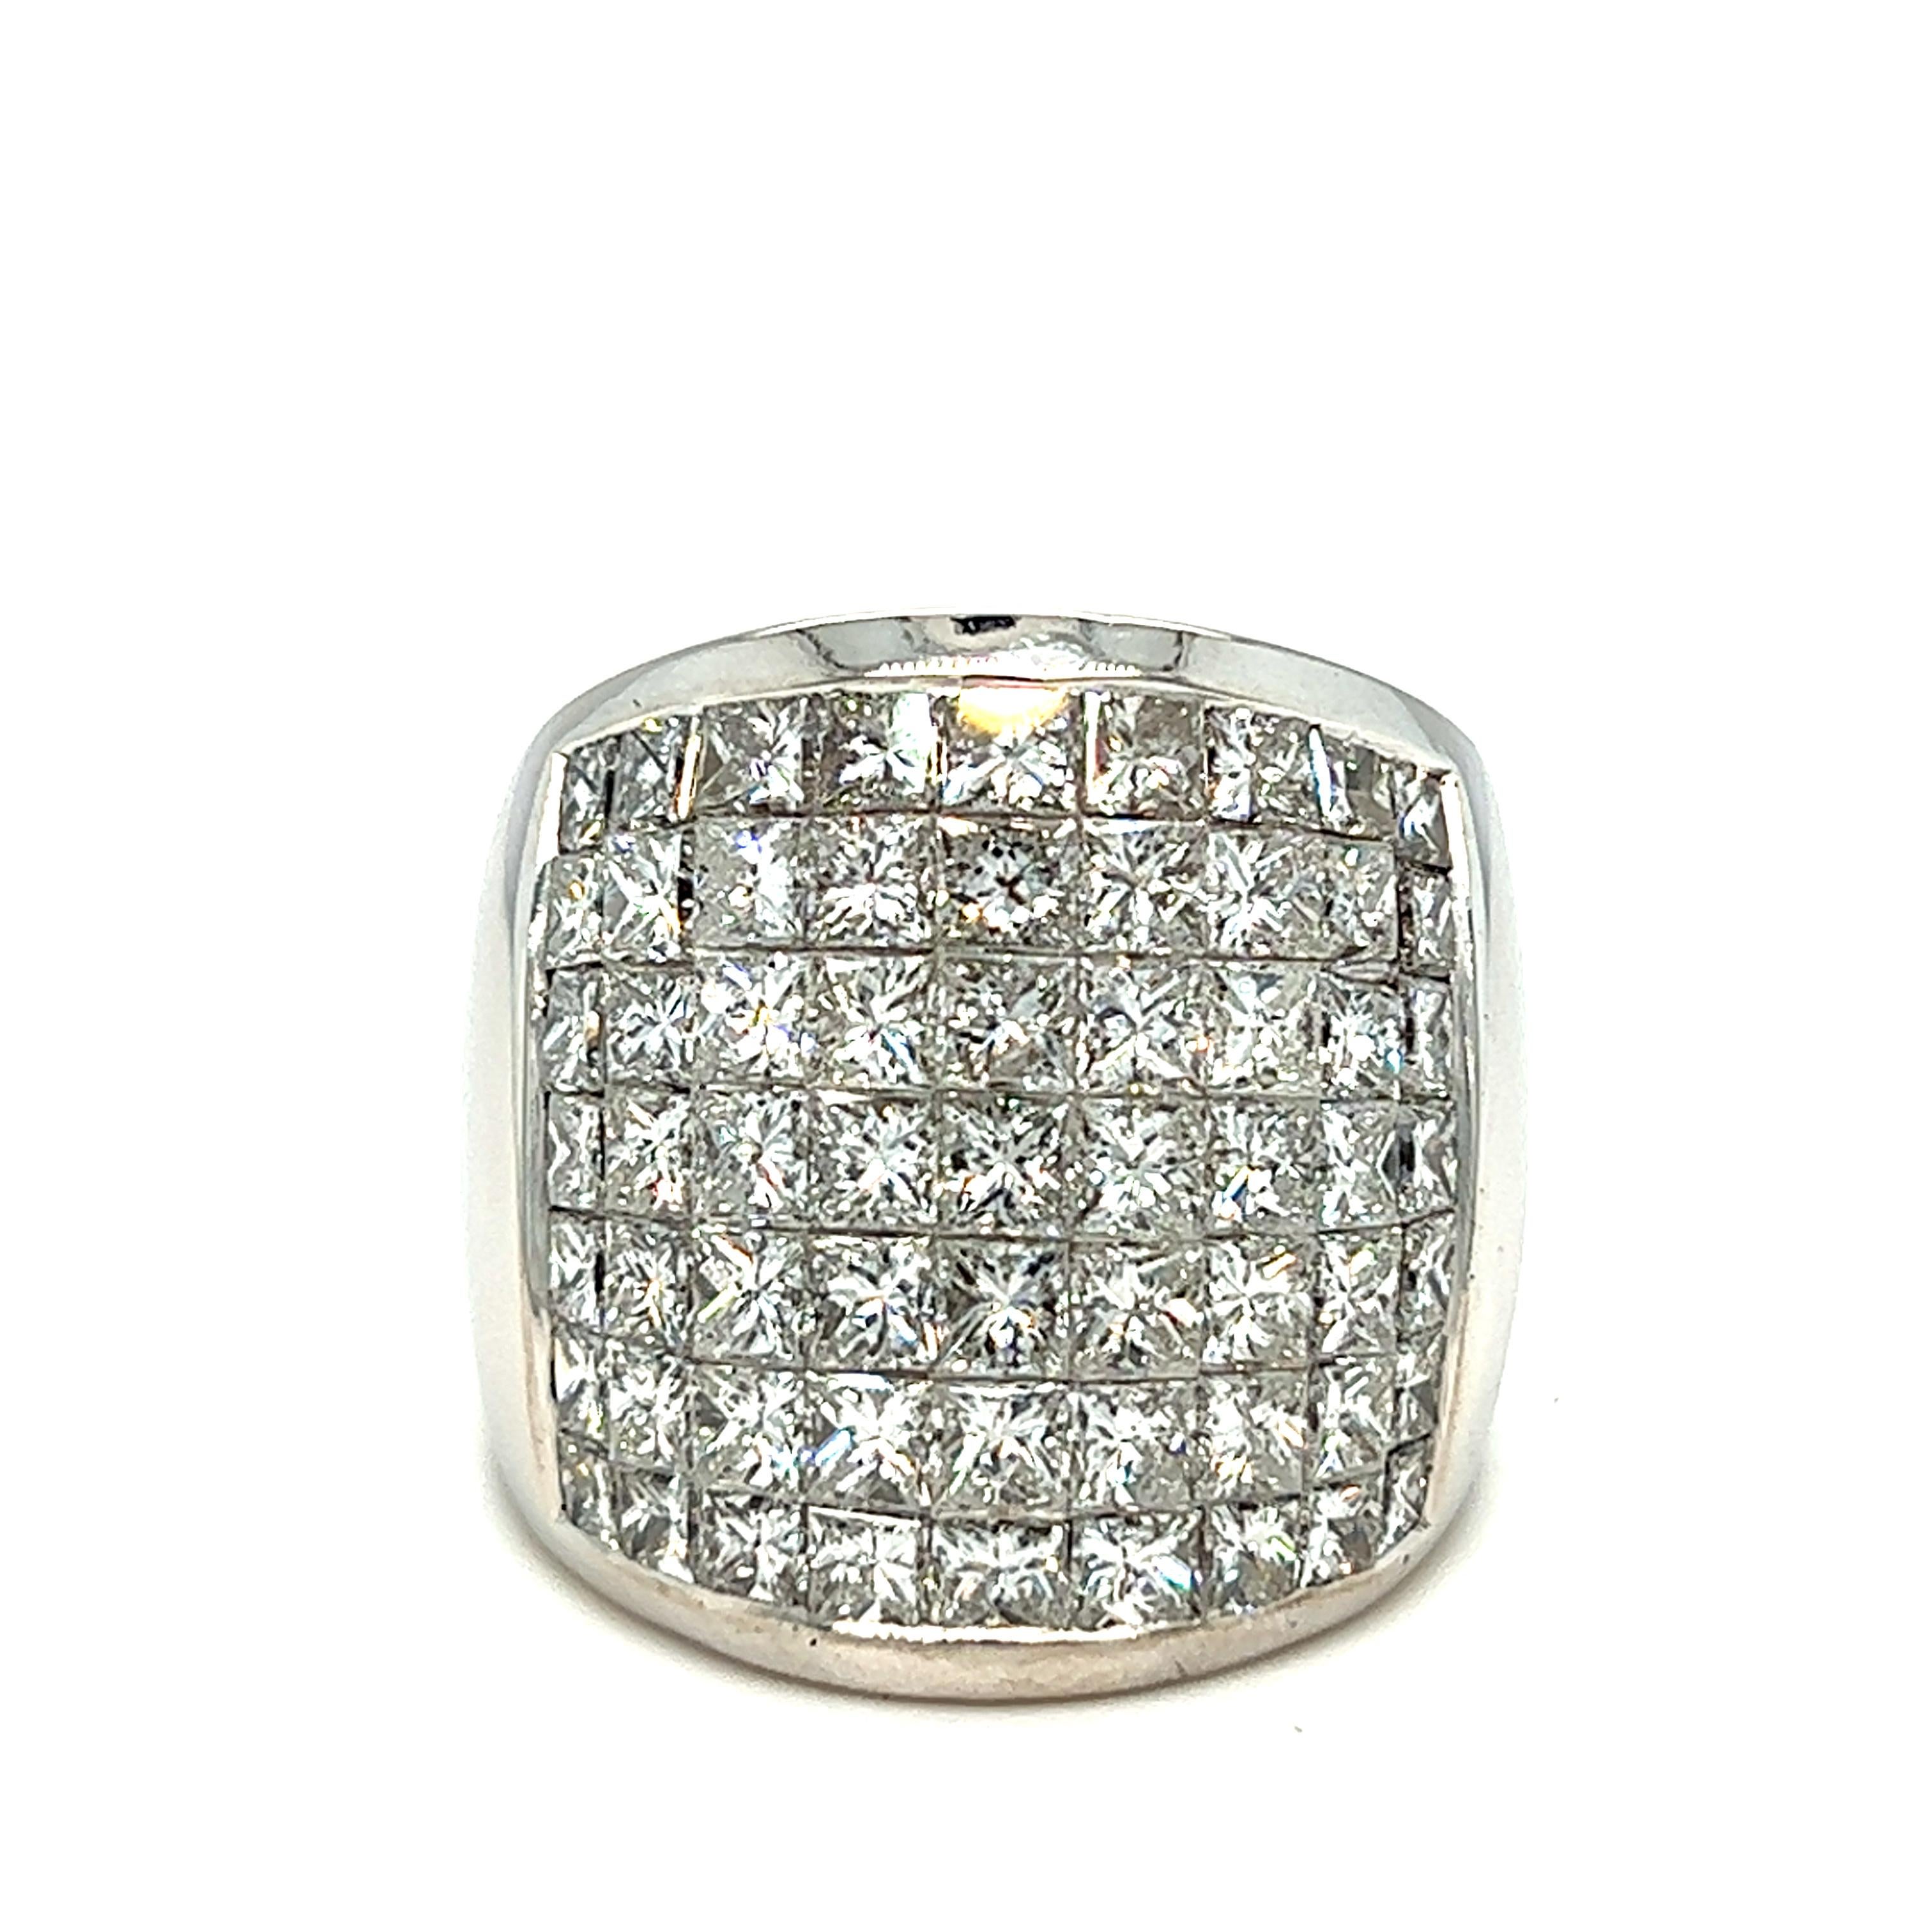 Invisible Set Princess Cut Diamond Wide Band Dome Ring 18k White Gold In Excellent Condition For Sale In beverly hills, CA